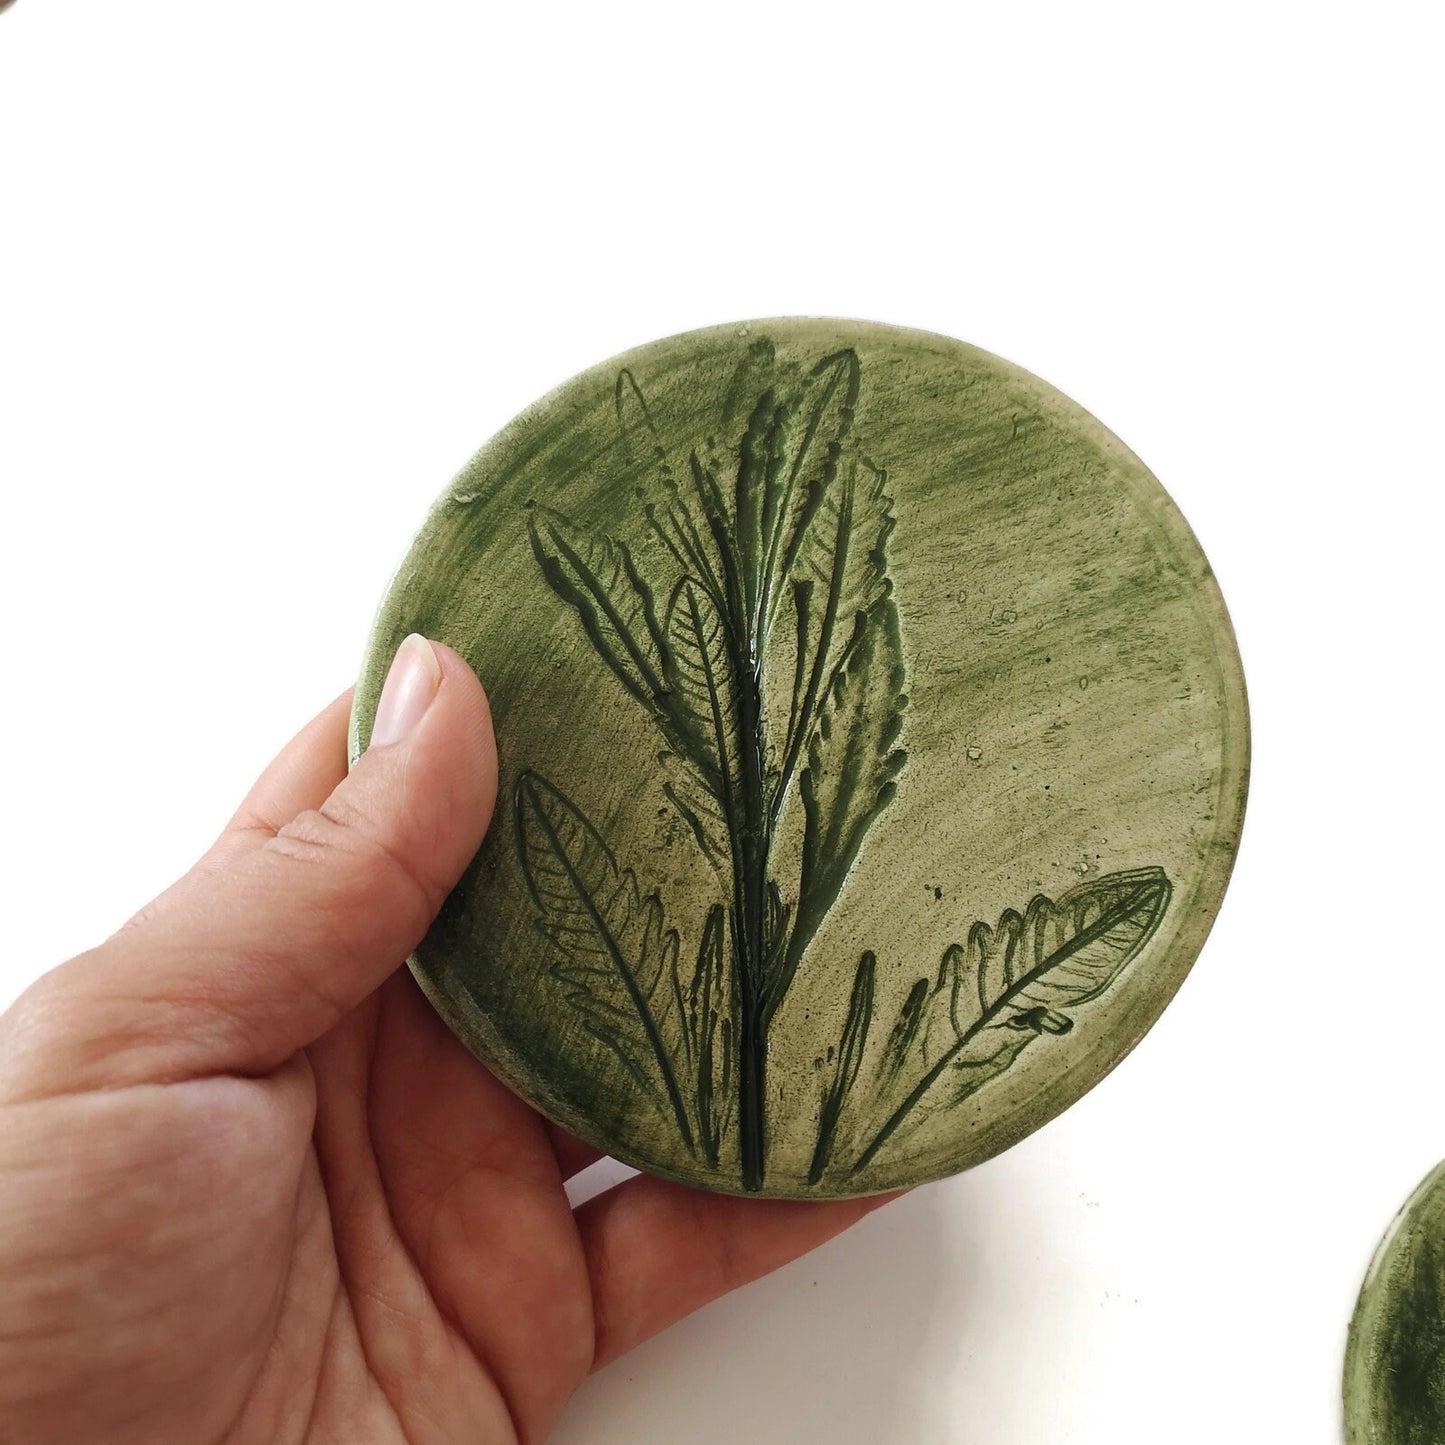 3Pcs Handmade Ceramic Coasters, Round Tiles With Cork Back and Green Lavender Leaves Design, Beer Coasters, Unusual Modern Pressed Plant - Ceramica Ana Rafael